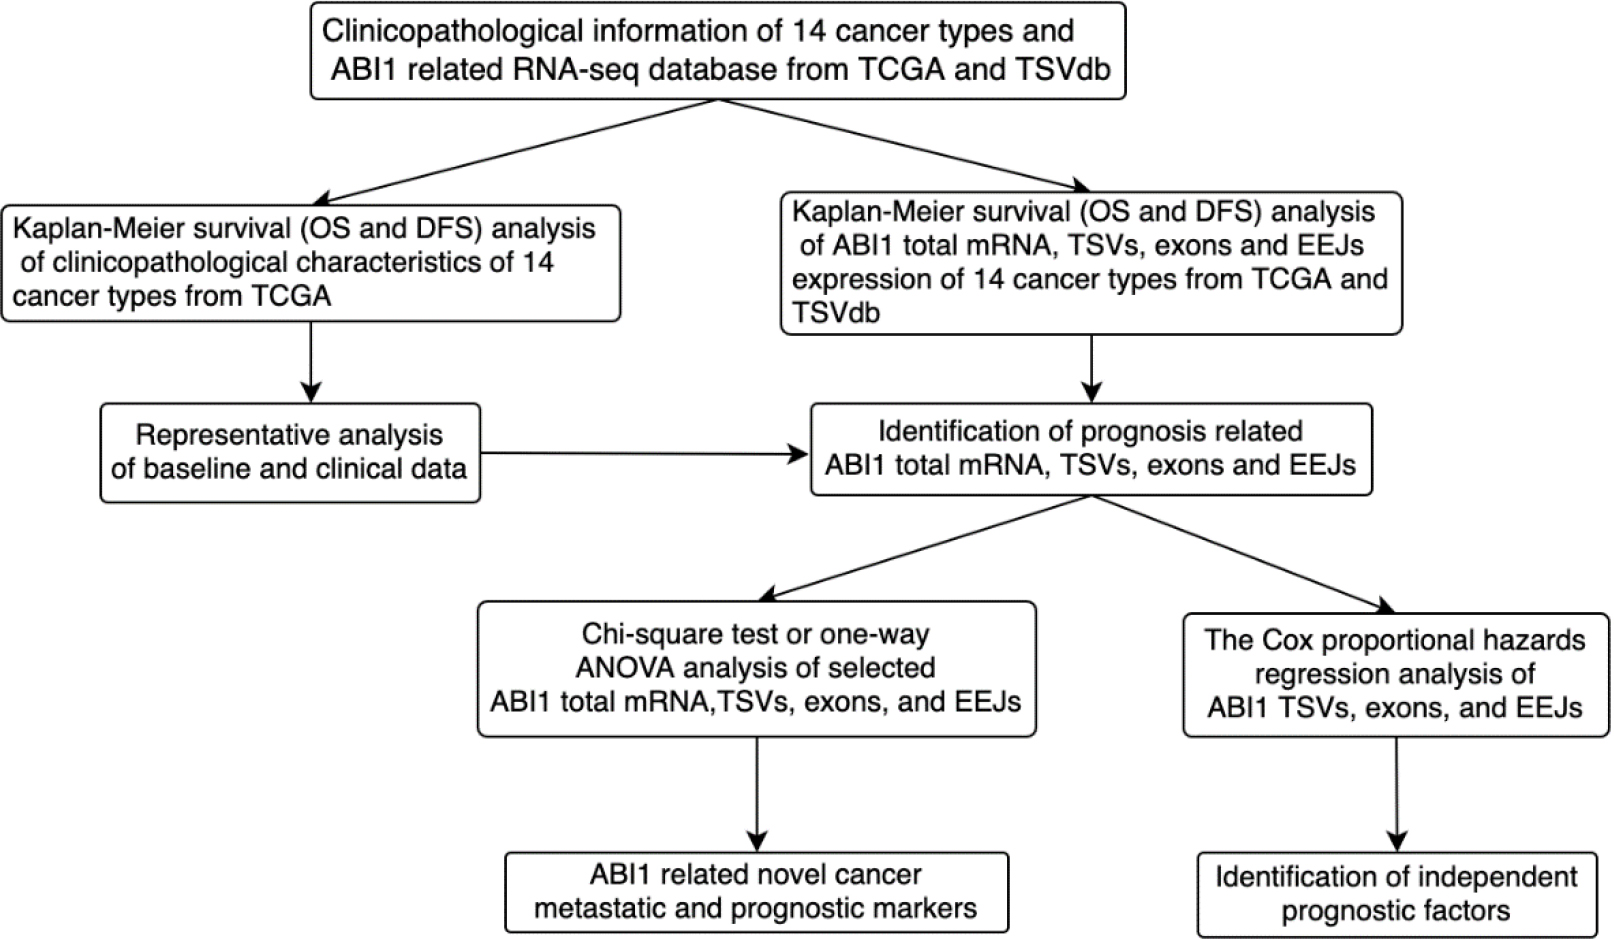 Flowchart for the identification and analysis of metastatic and prognostic ABI1 total mRNA, TSVs, exons, and EEJs in pan-cancer.